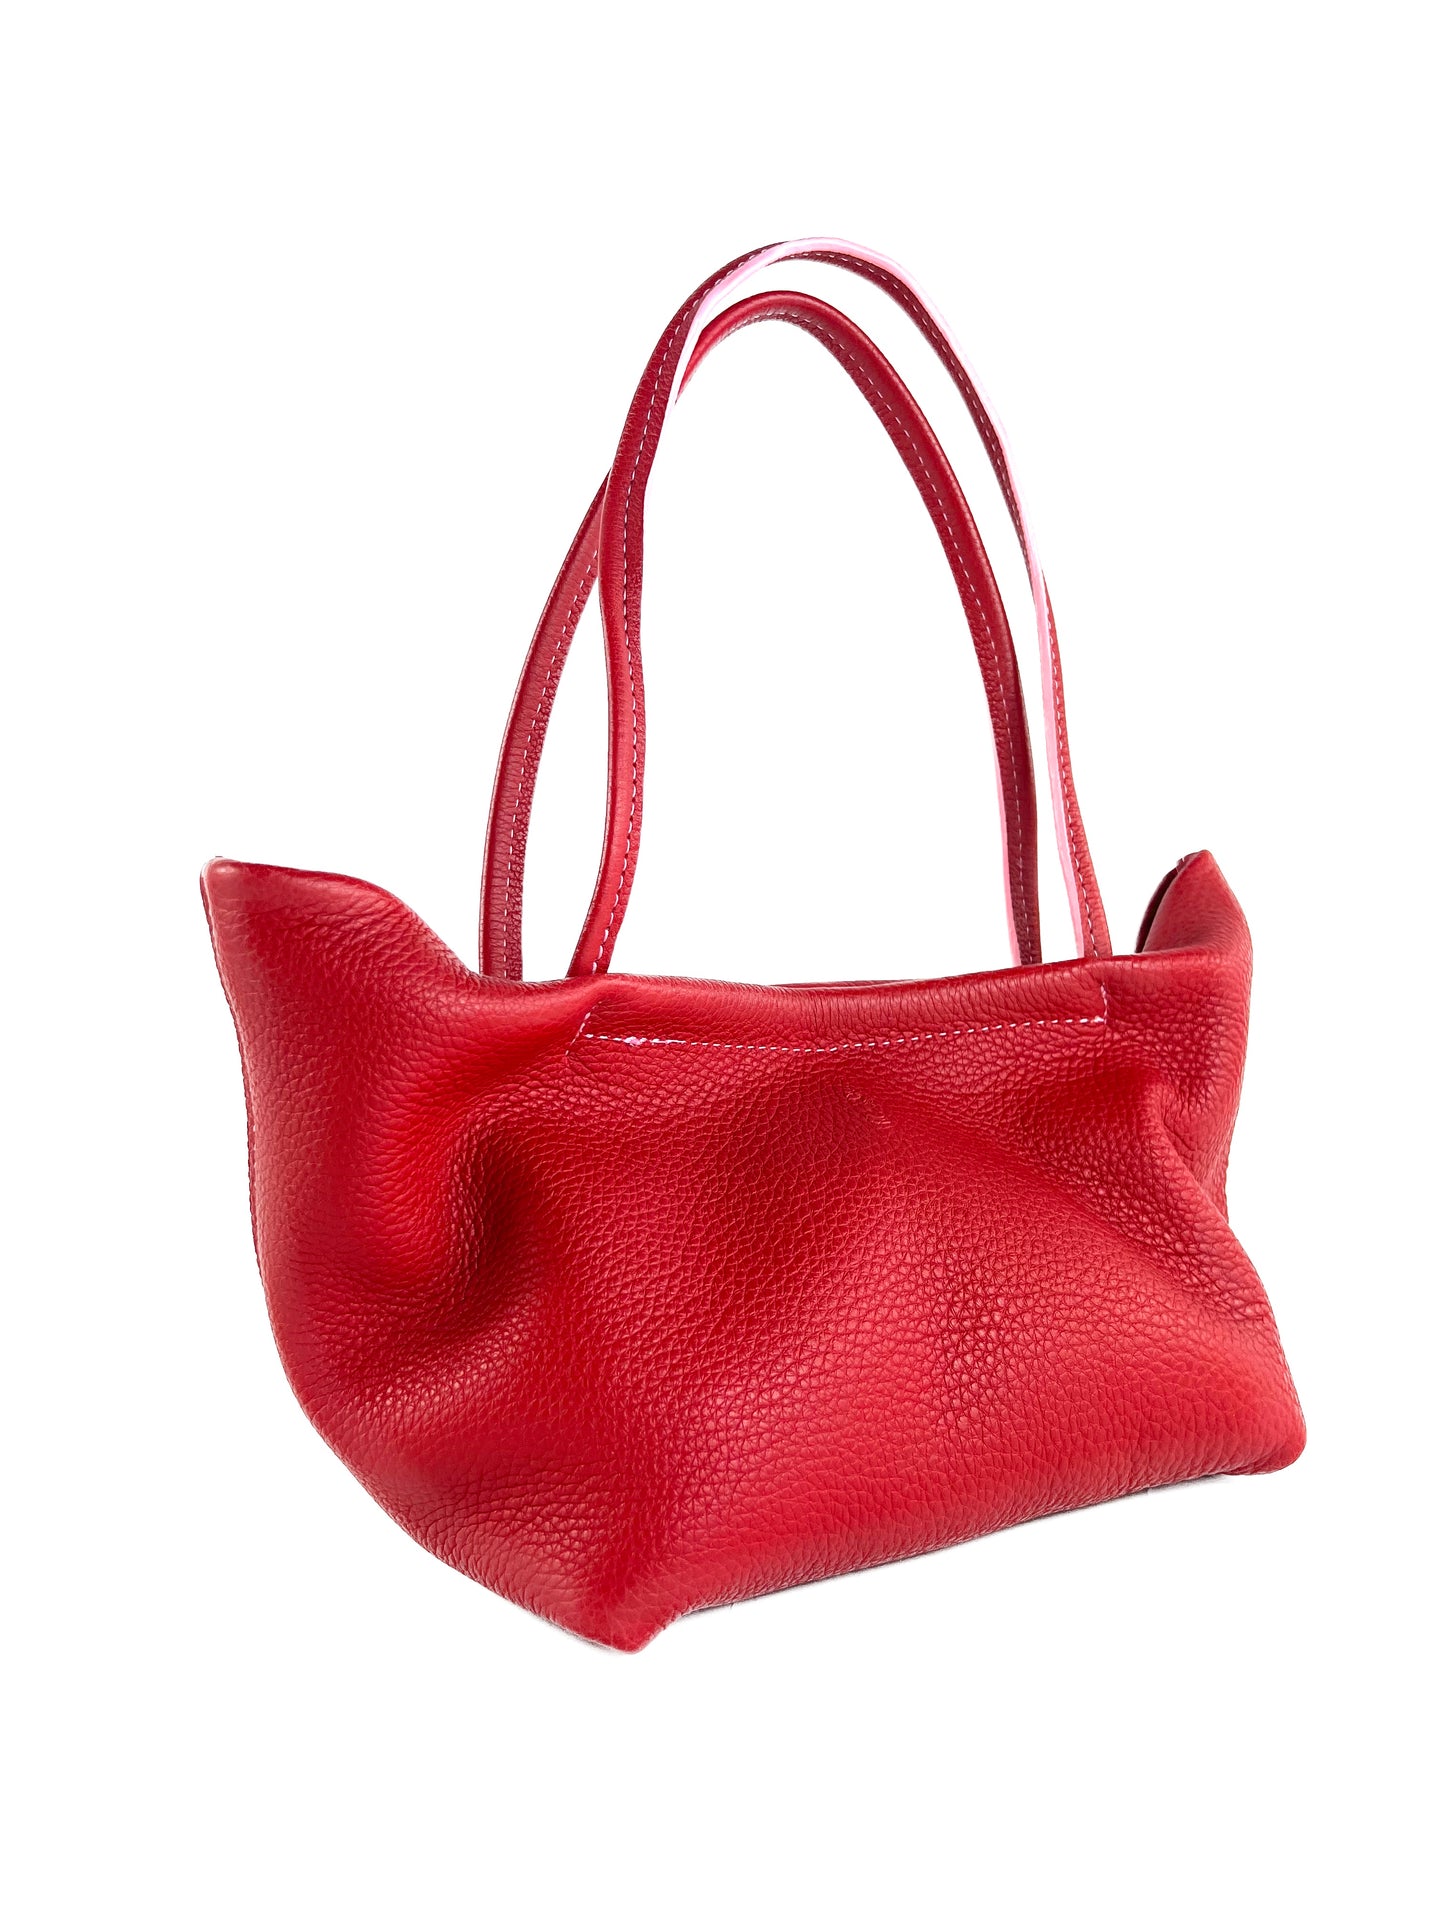 Carly Tote - Pebbled Raspberry